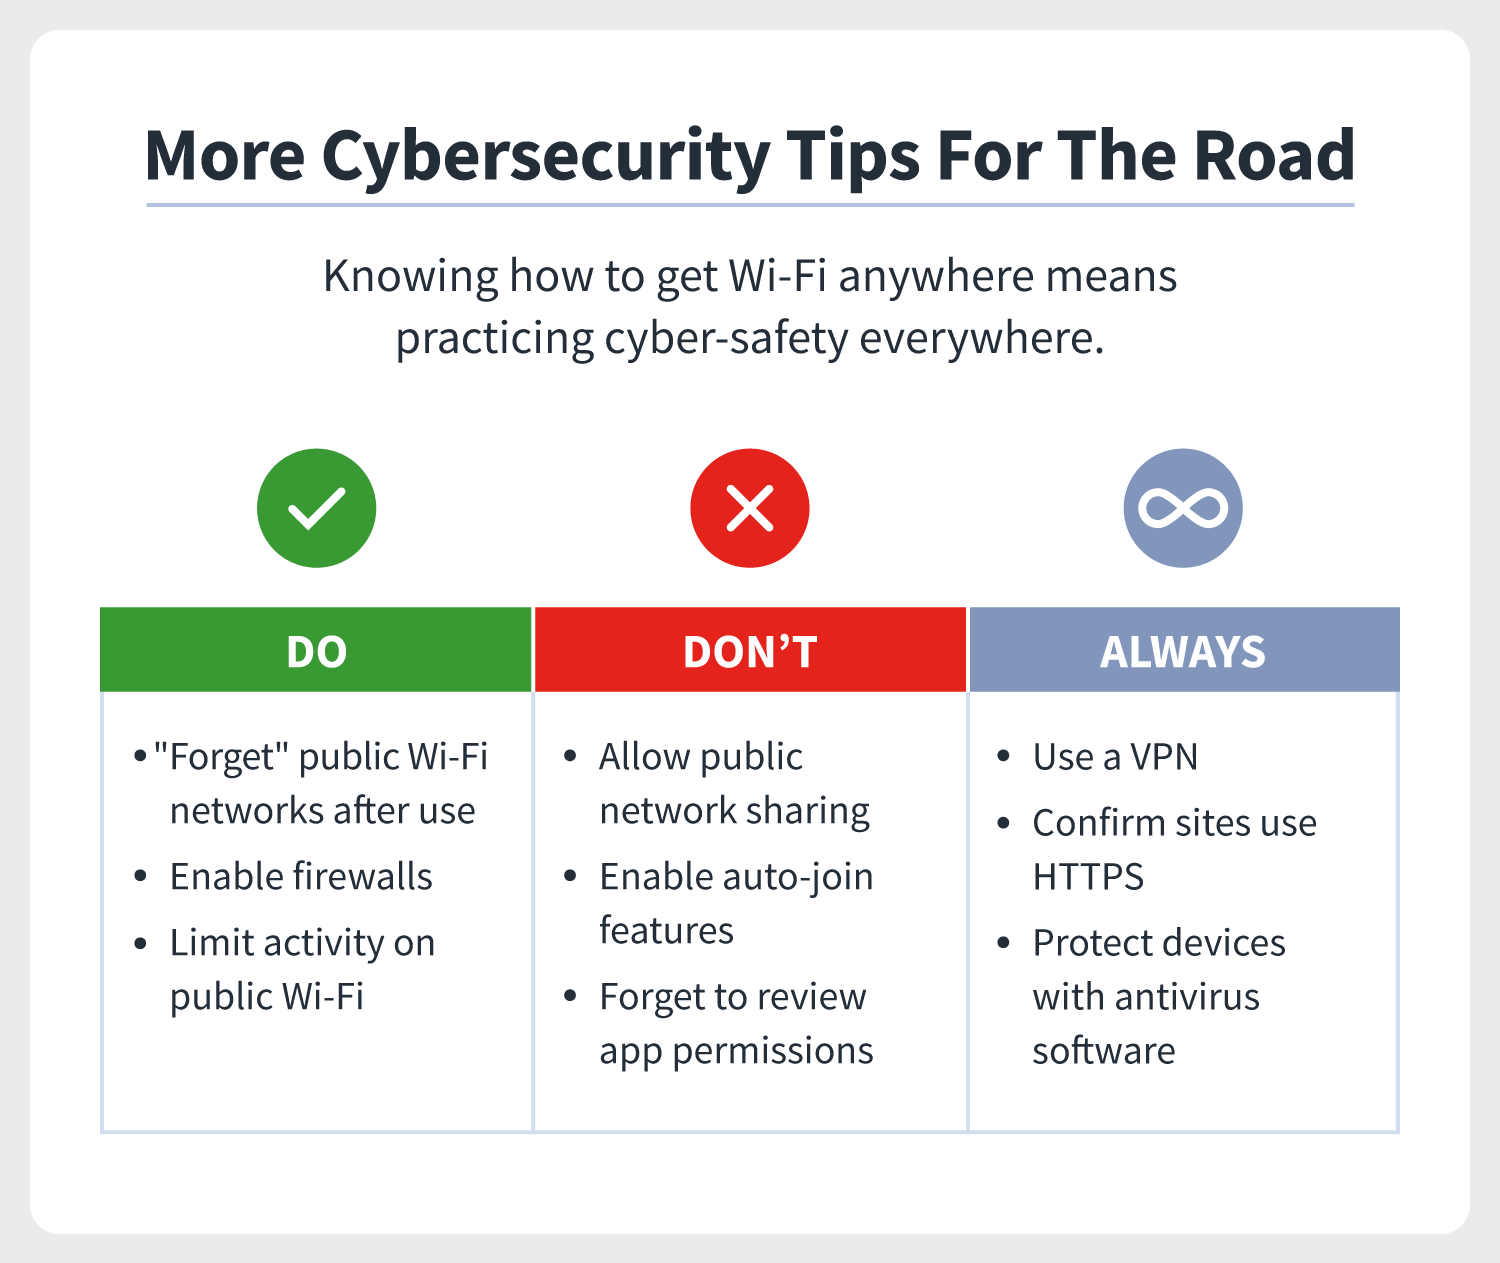 More cybersecurity tips for the road